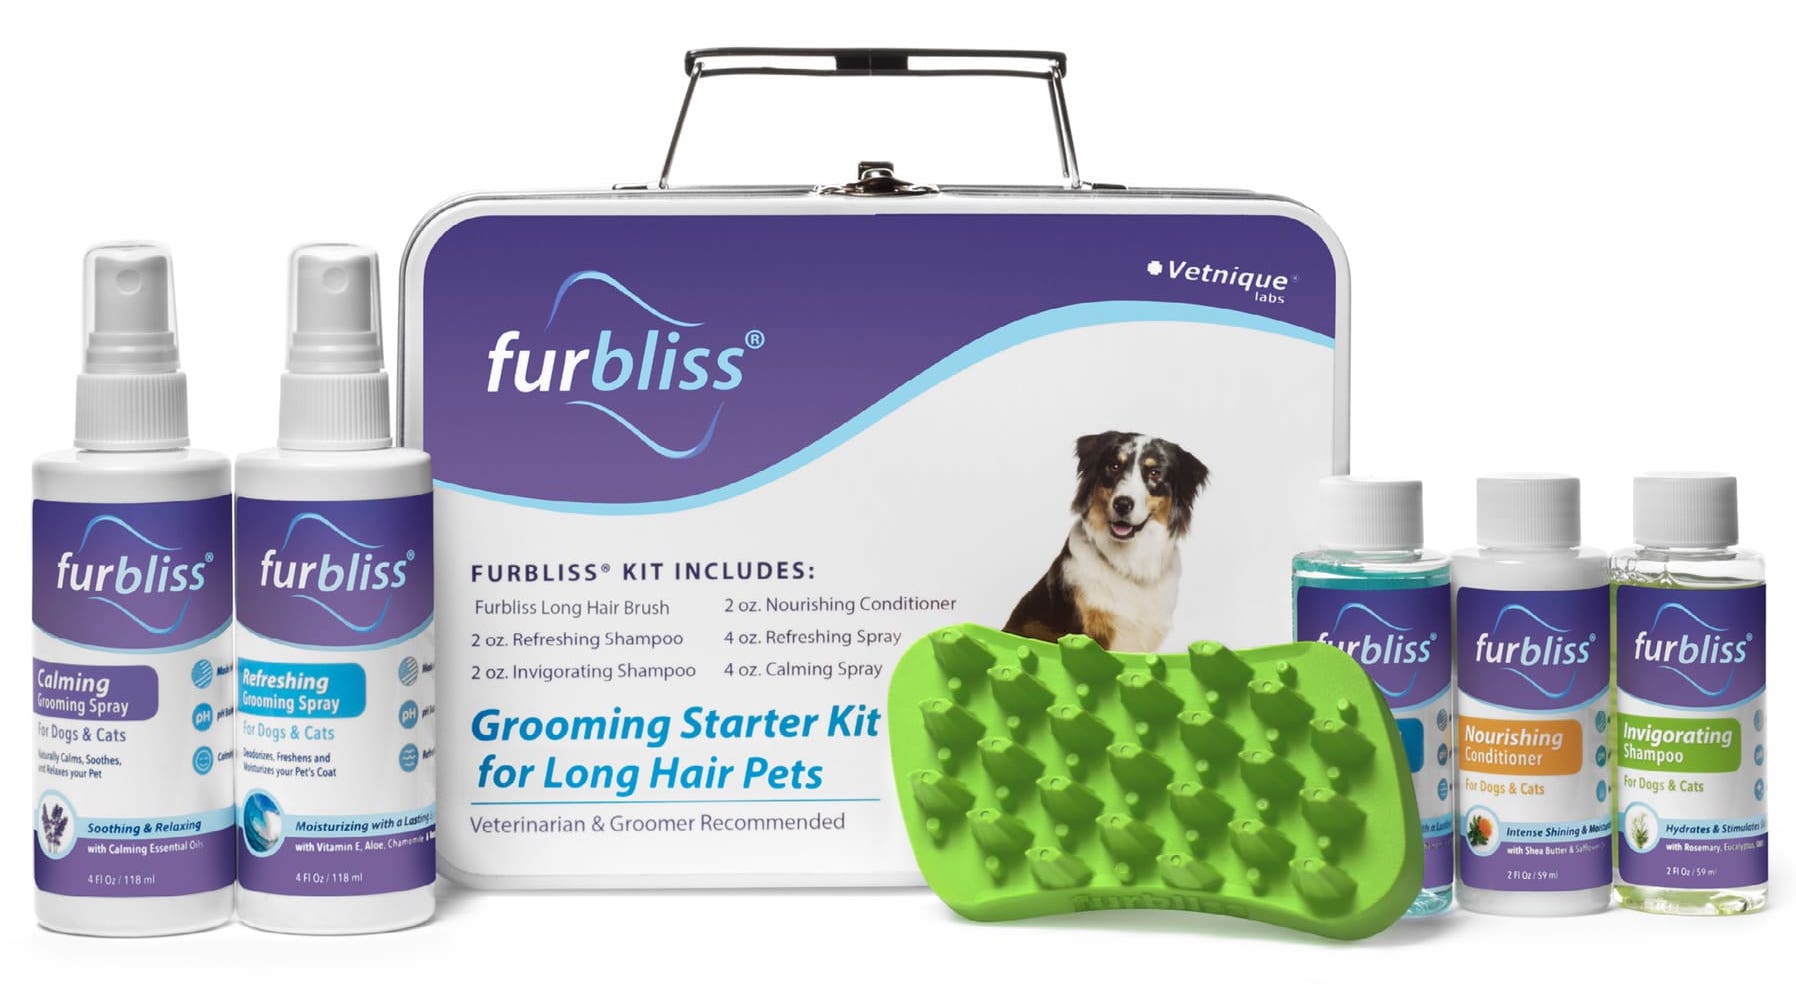 Furbliss Grooming & Bathing Kit 1 count for pets with long hair 1